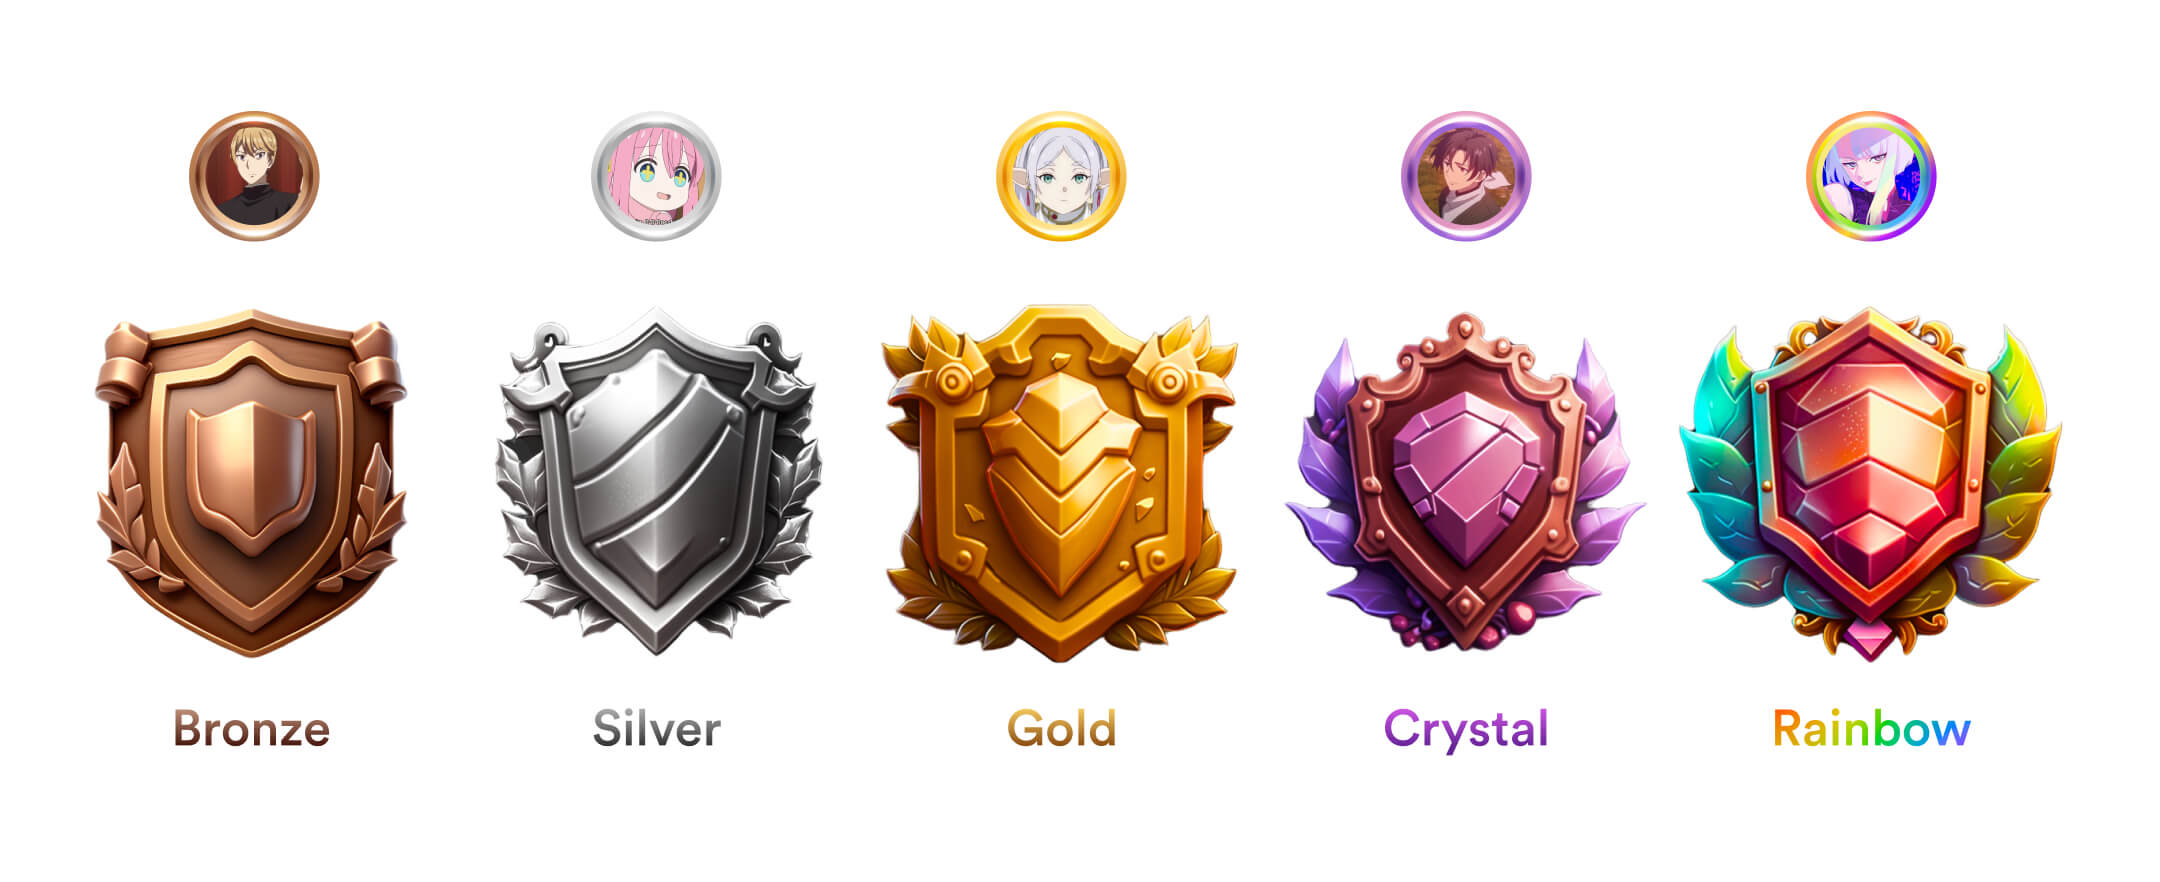 Badges and avatar ring for each of the five leagues - bronze, silver, gold, crystal, and rainbow